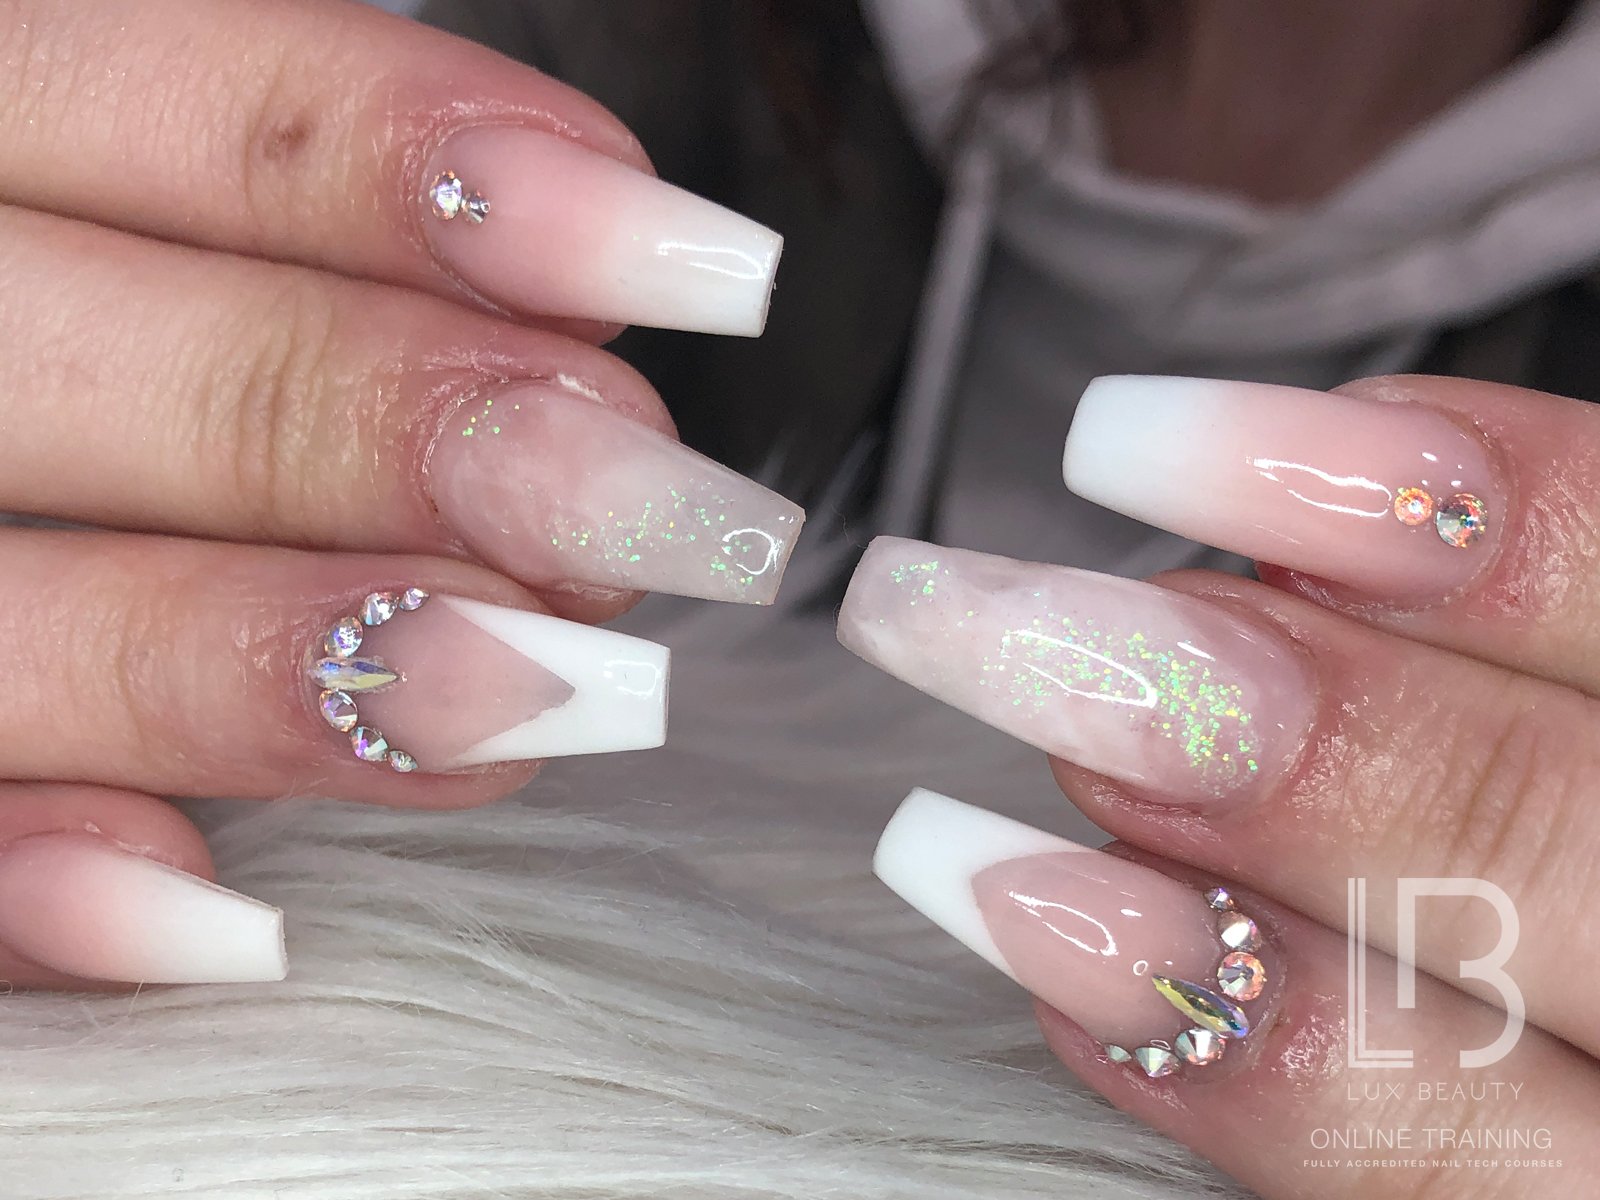 Acrylic Nail Extension Course Online With Kit Lux Beauty Training Academy